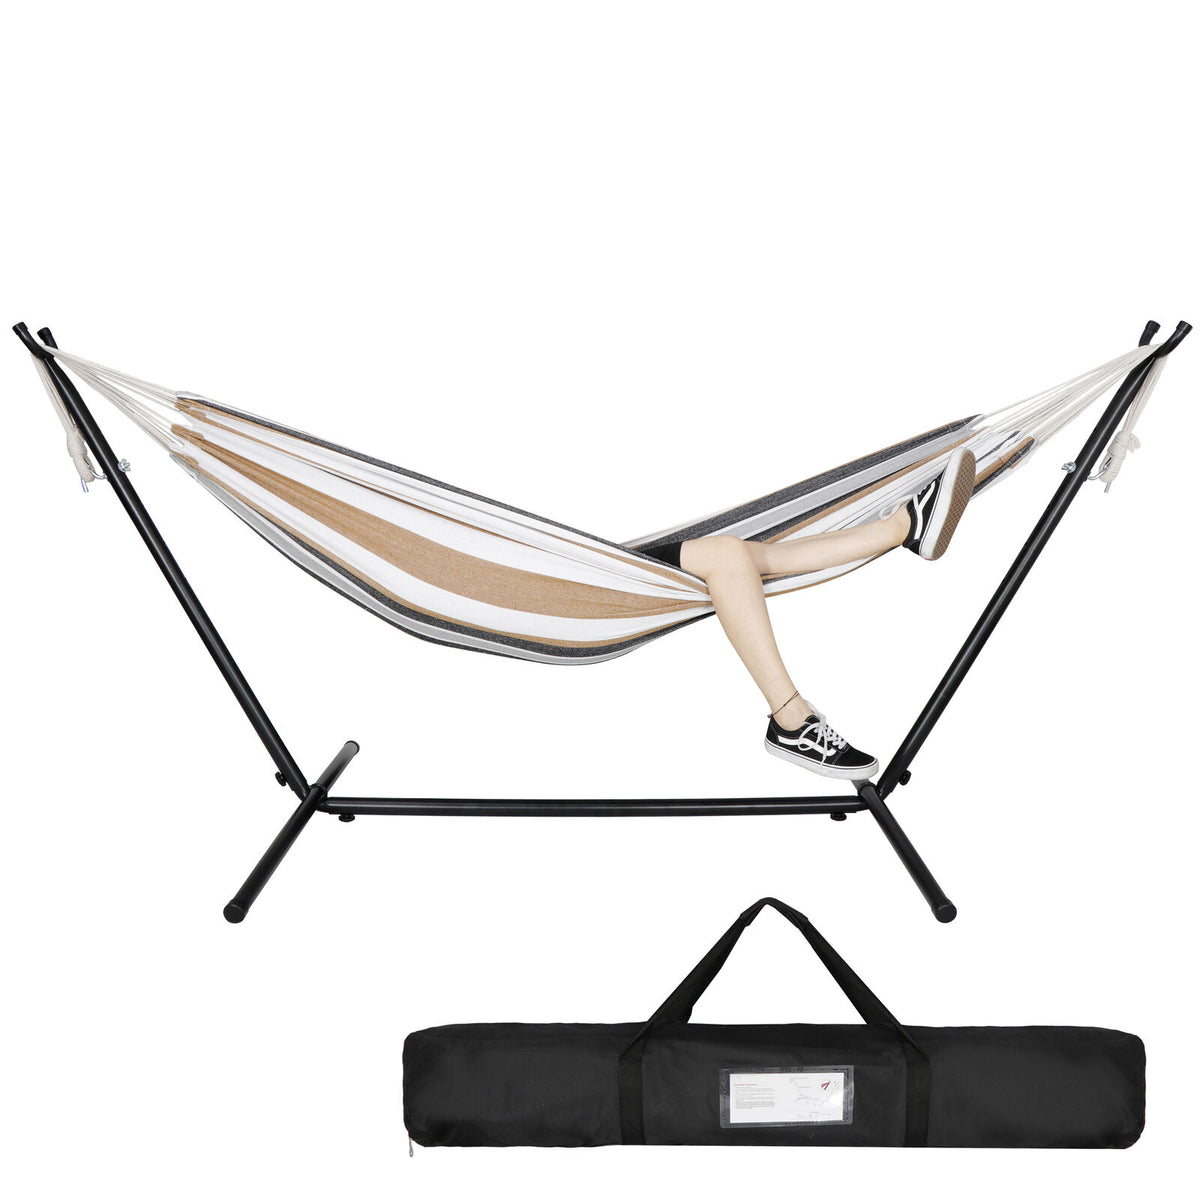 Portable Hammock with Stand 2 Person Carrying Case Outdoor Patio Use Camping